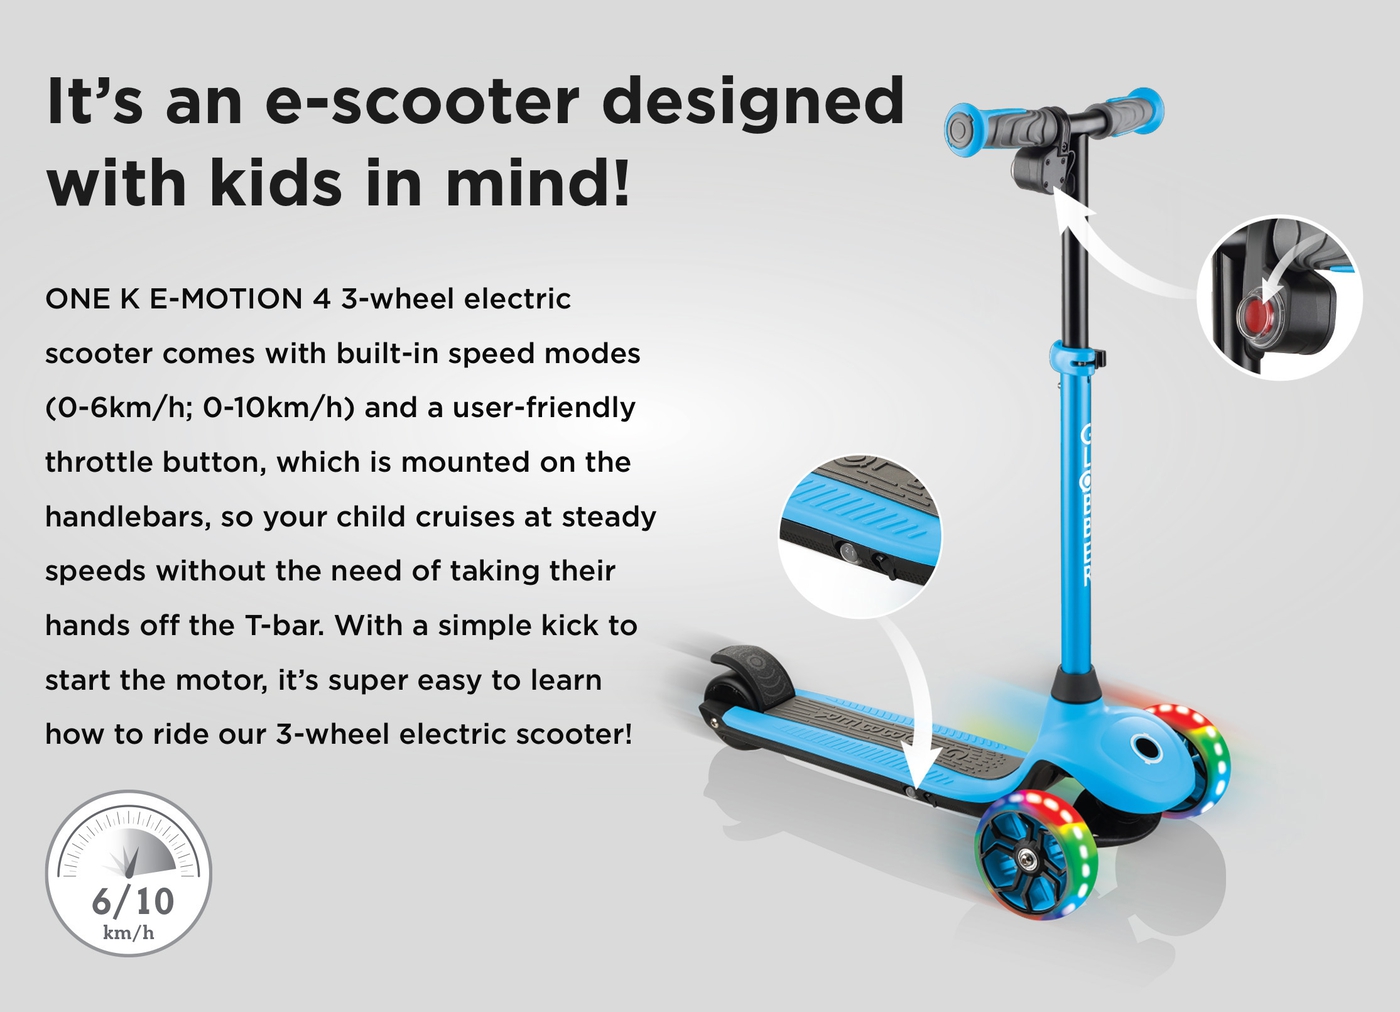 It’s an e-scooter designed with kids in mind!